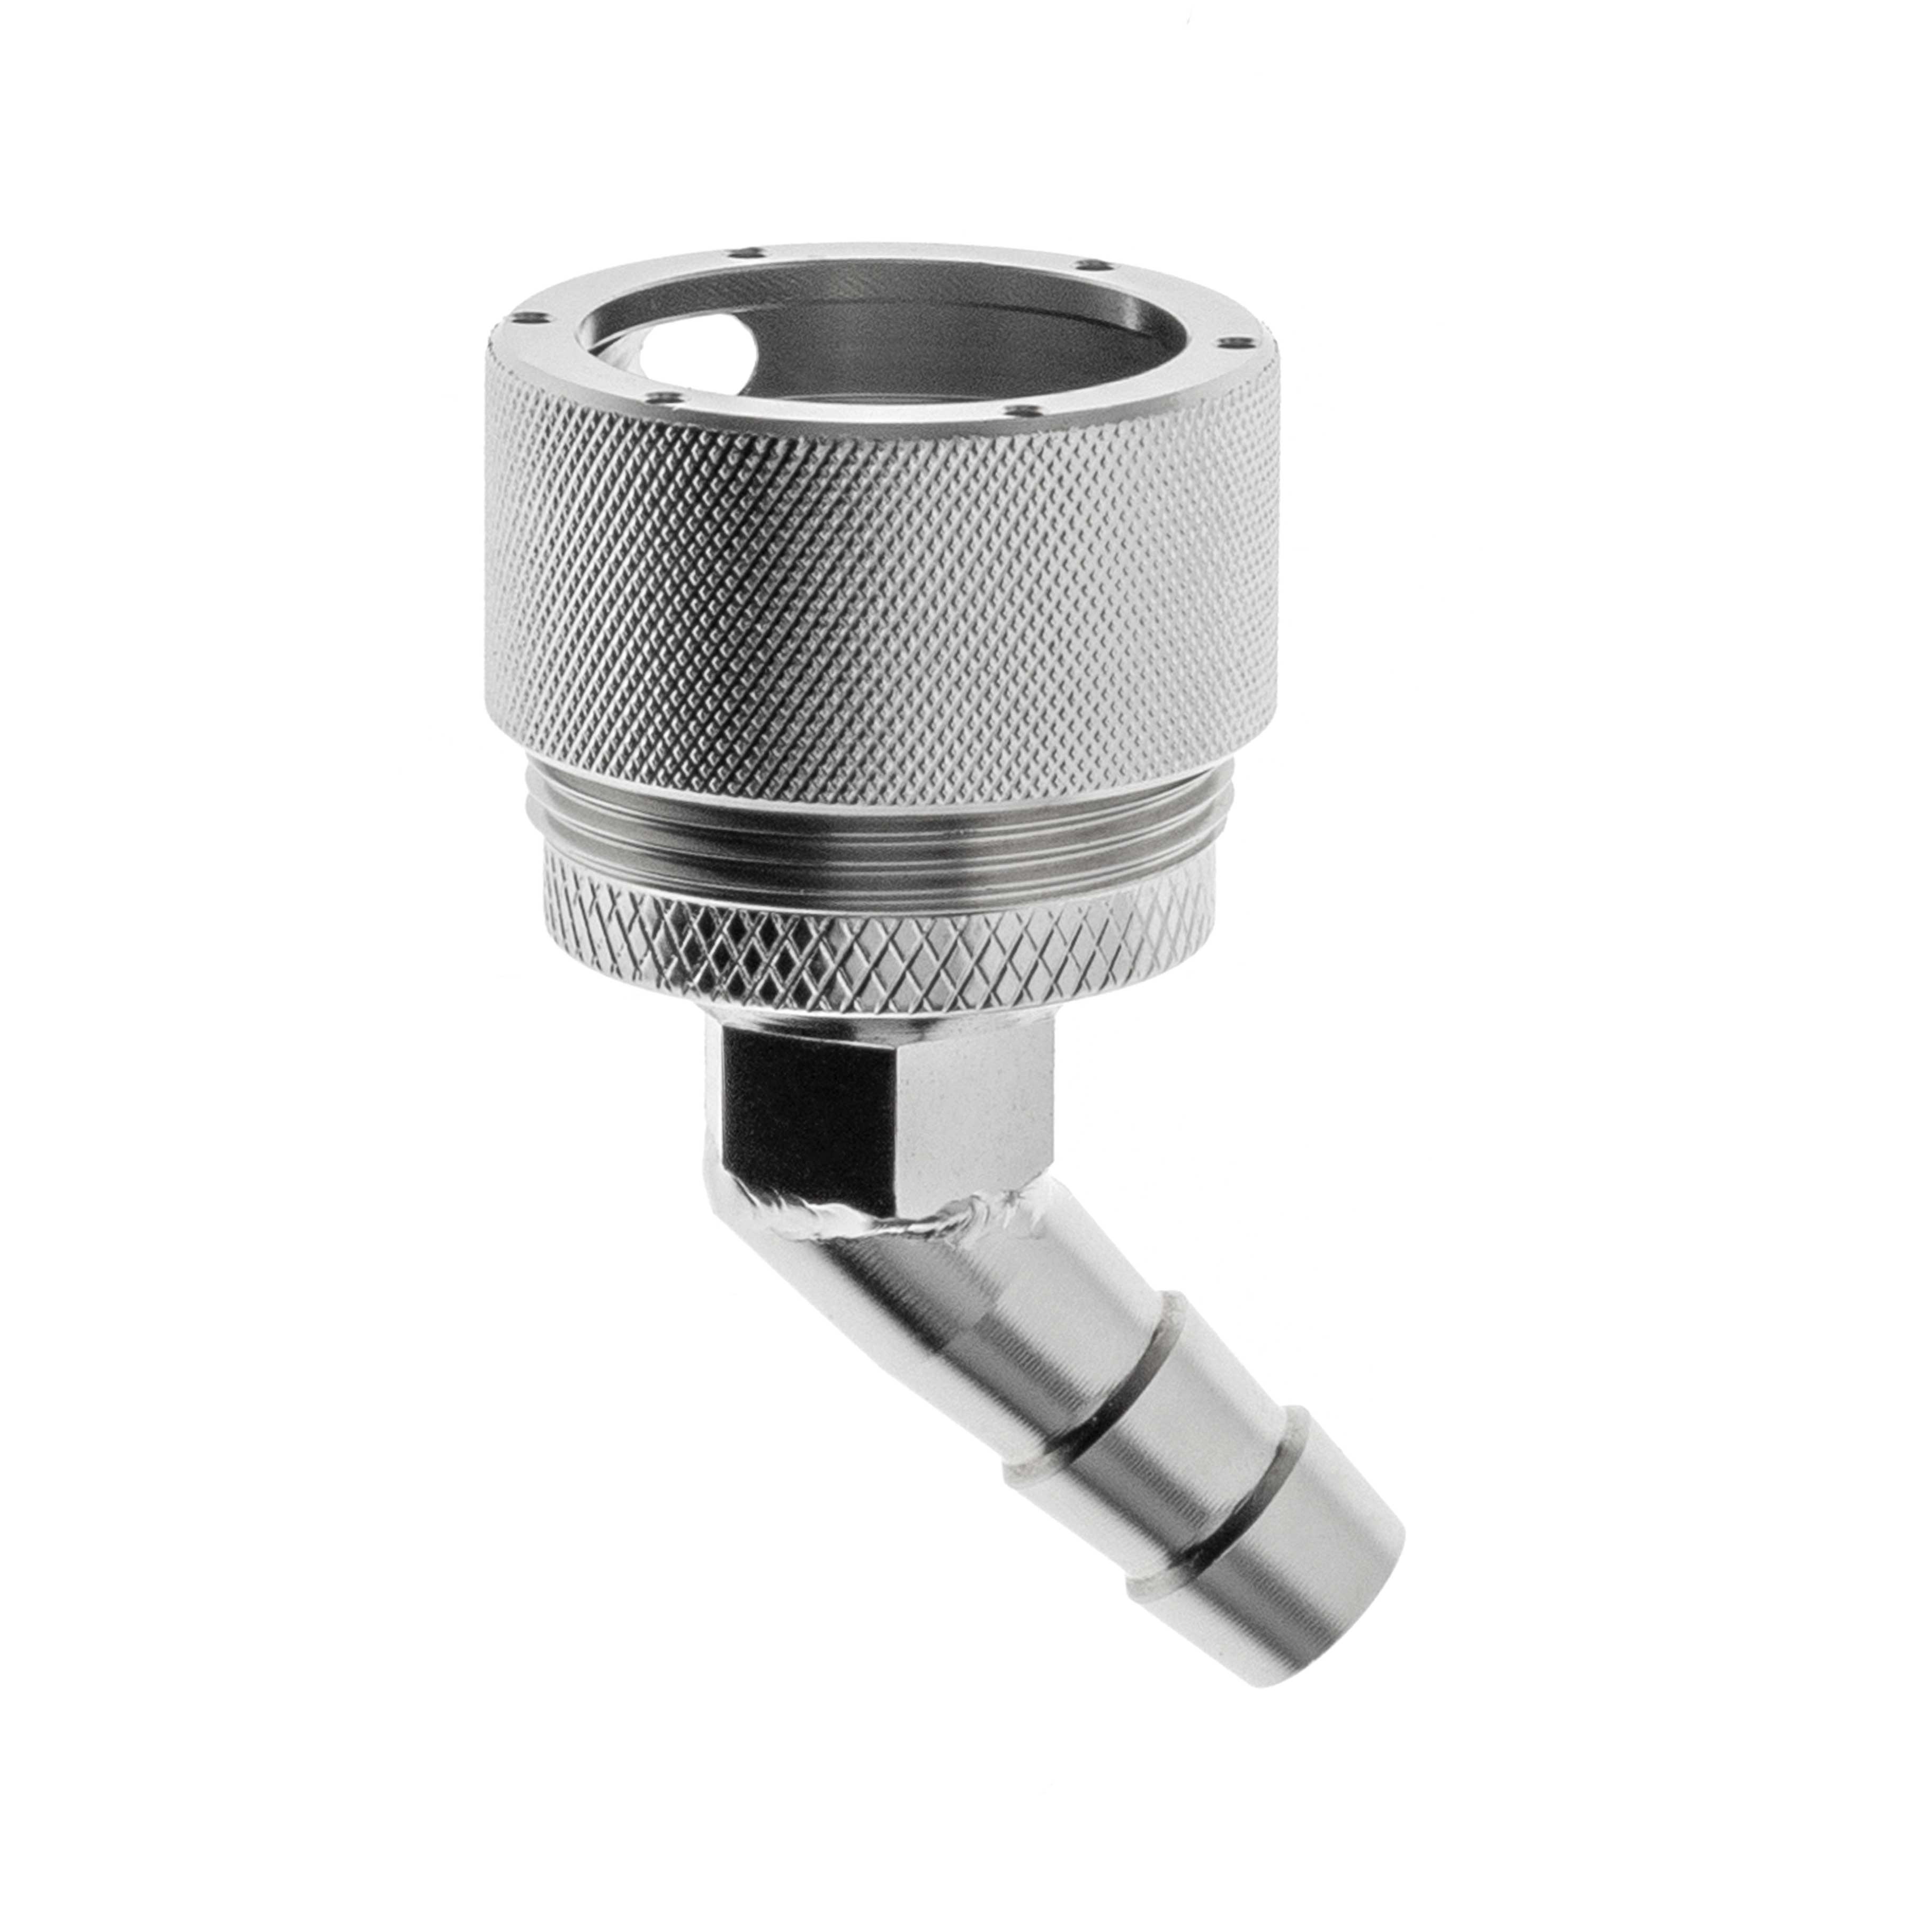 Metal adapter for hose connection. DN15 metal adapter for hose connection M 30x15